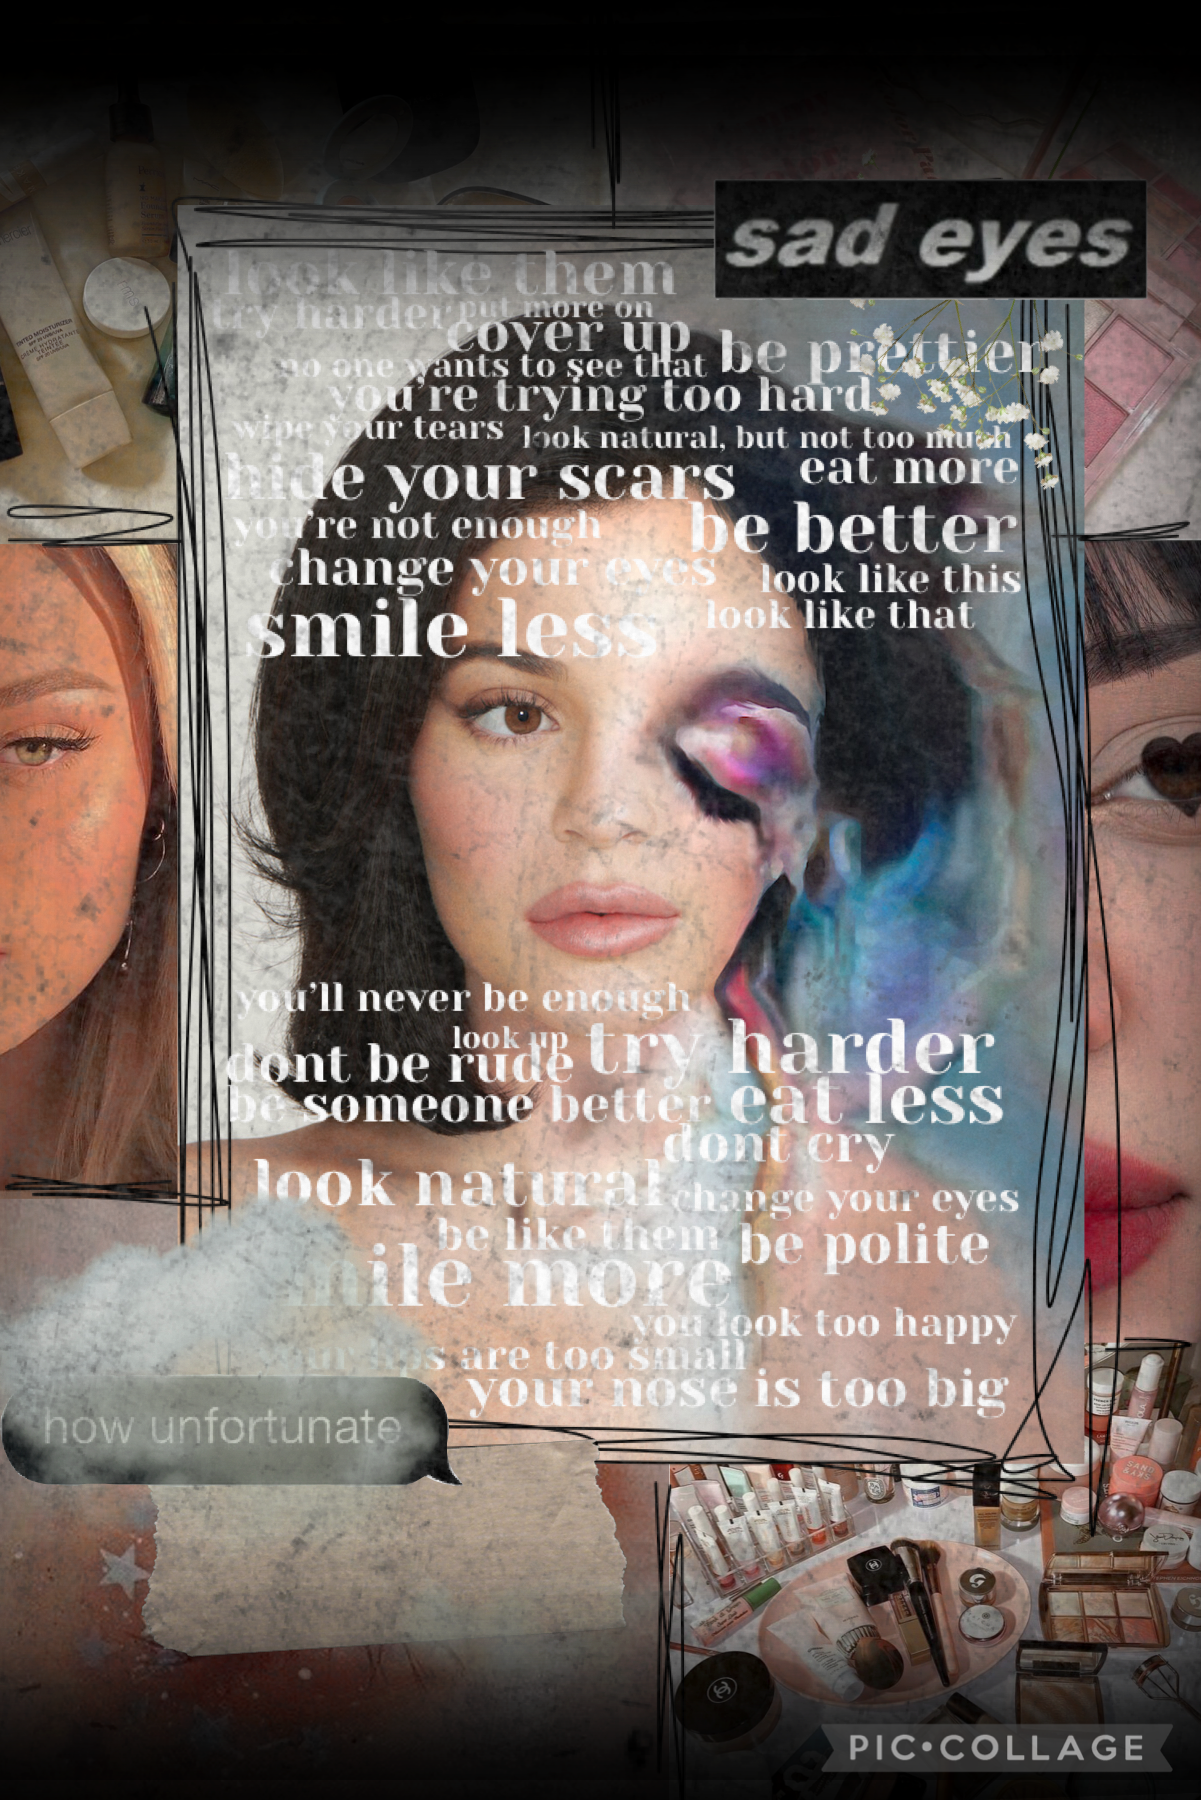 tap please
i rlly h8 this but i had to post something lol
this speaks a powerful message which is a problem in our society today. i hear insecurities like these everywhere i go so i wanted to dedicate a collage to it.
sotd: turbulence by jonah kagan